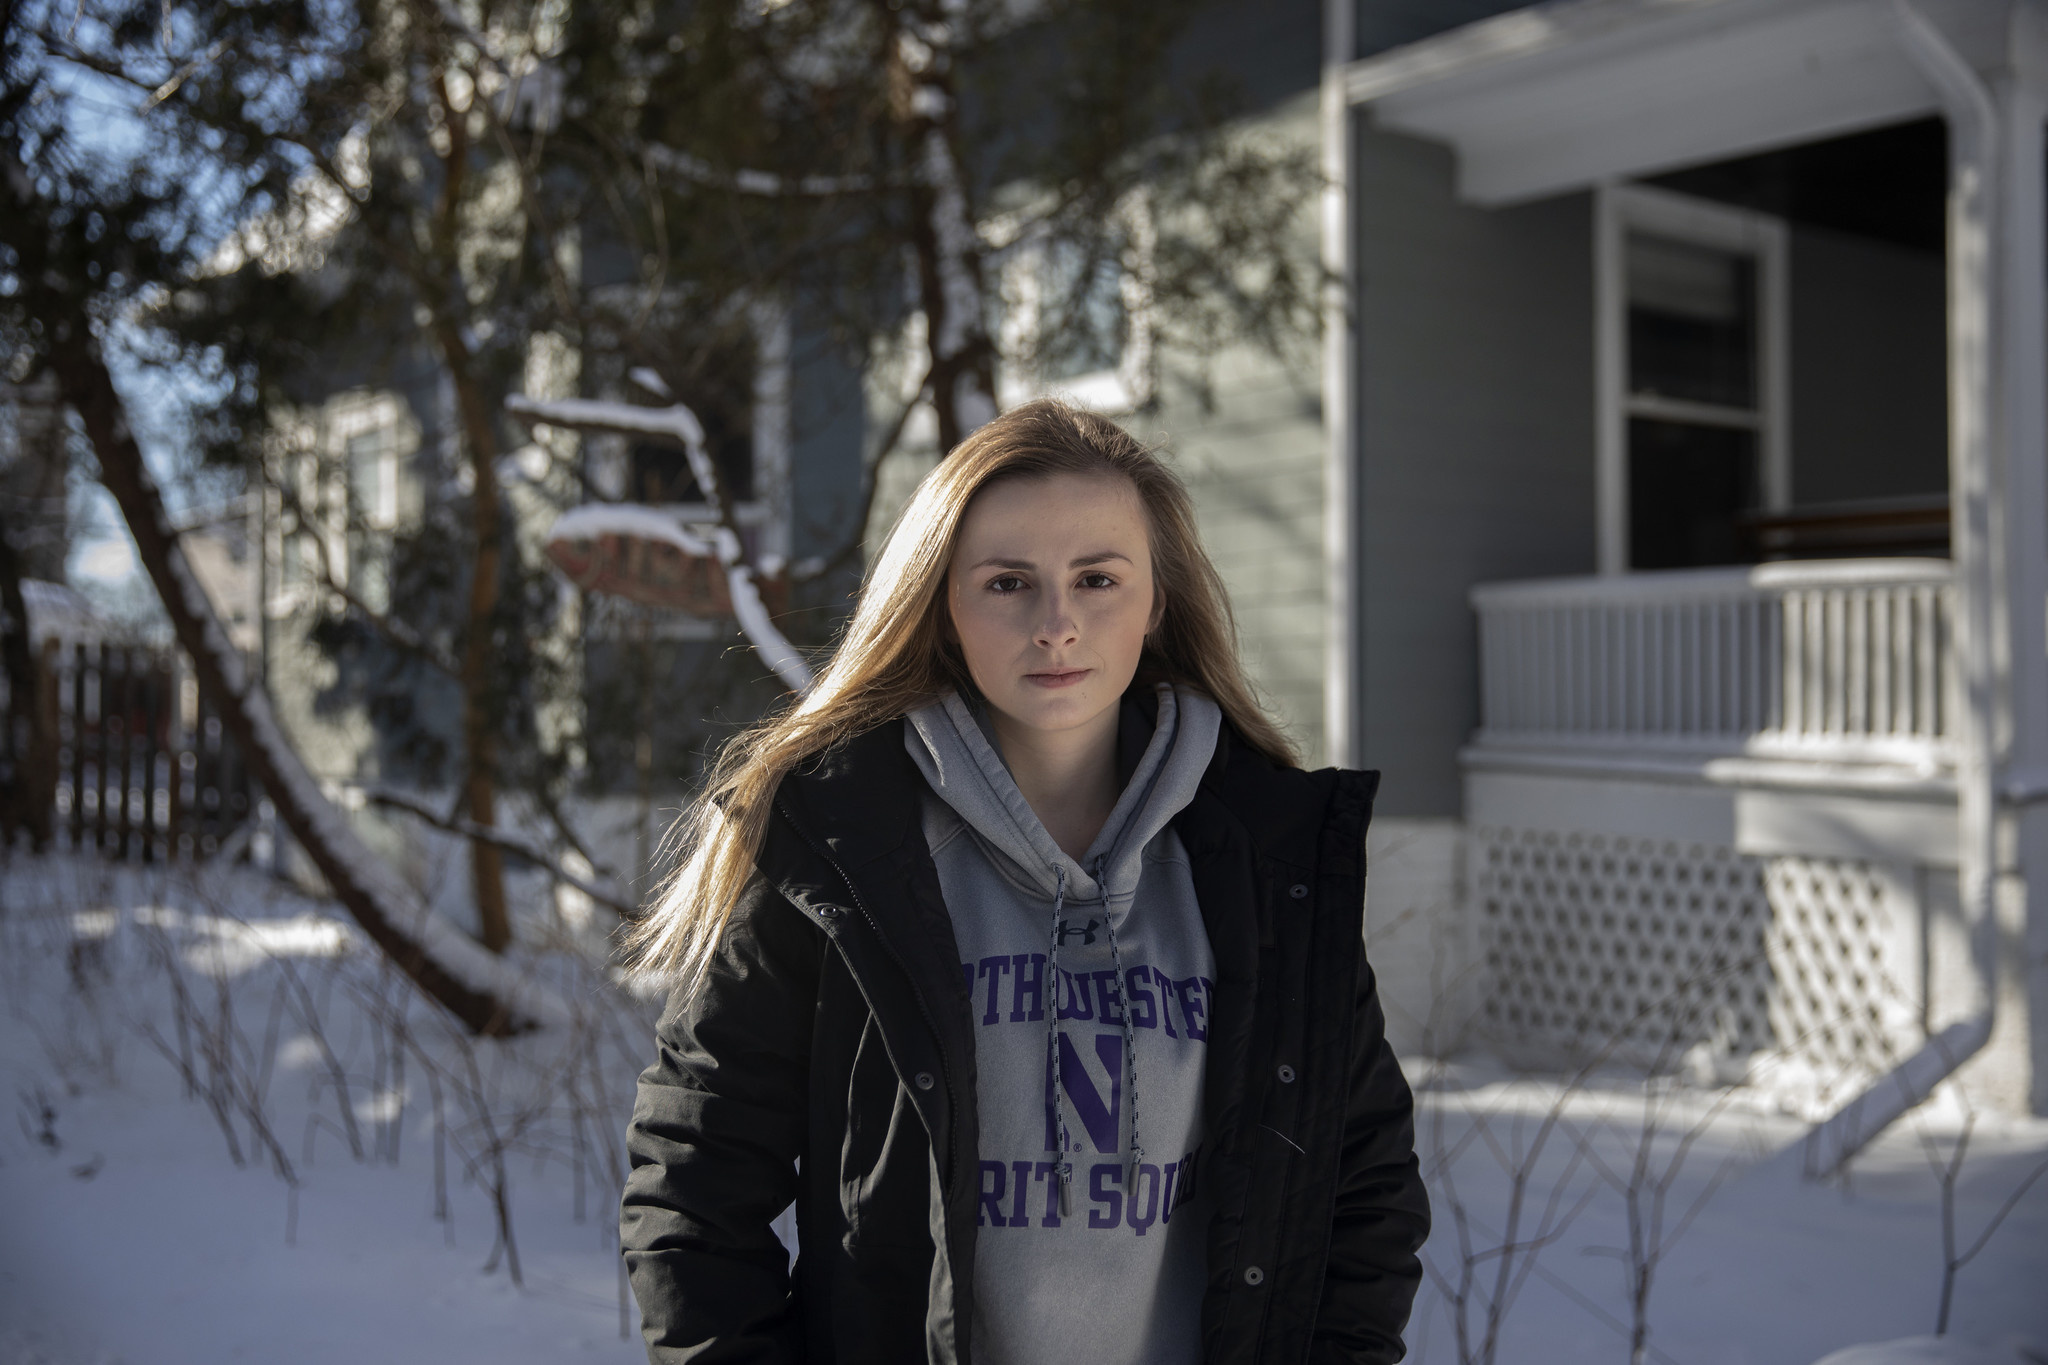 Cheerleader sues Northwestern University, says she was groped and harassed by drunken fans and that officials tried to cover up her complaints, lawsuit alleges